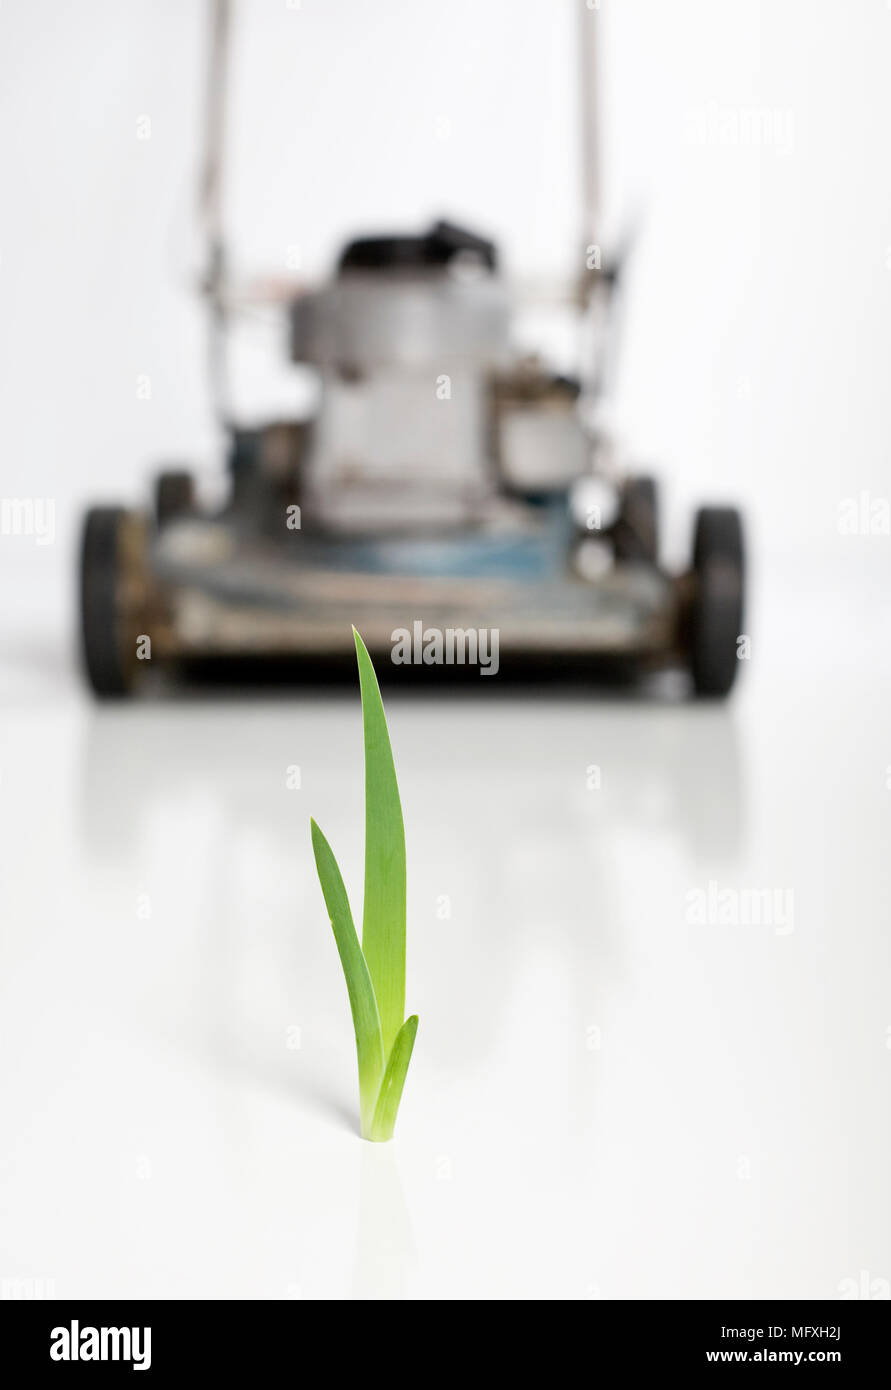 A sole blade of grass in a stand off with a lawnmower. Stock Photo